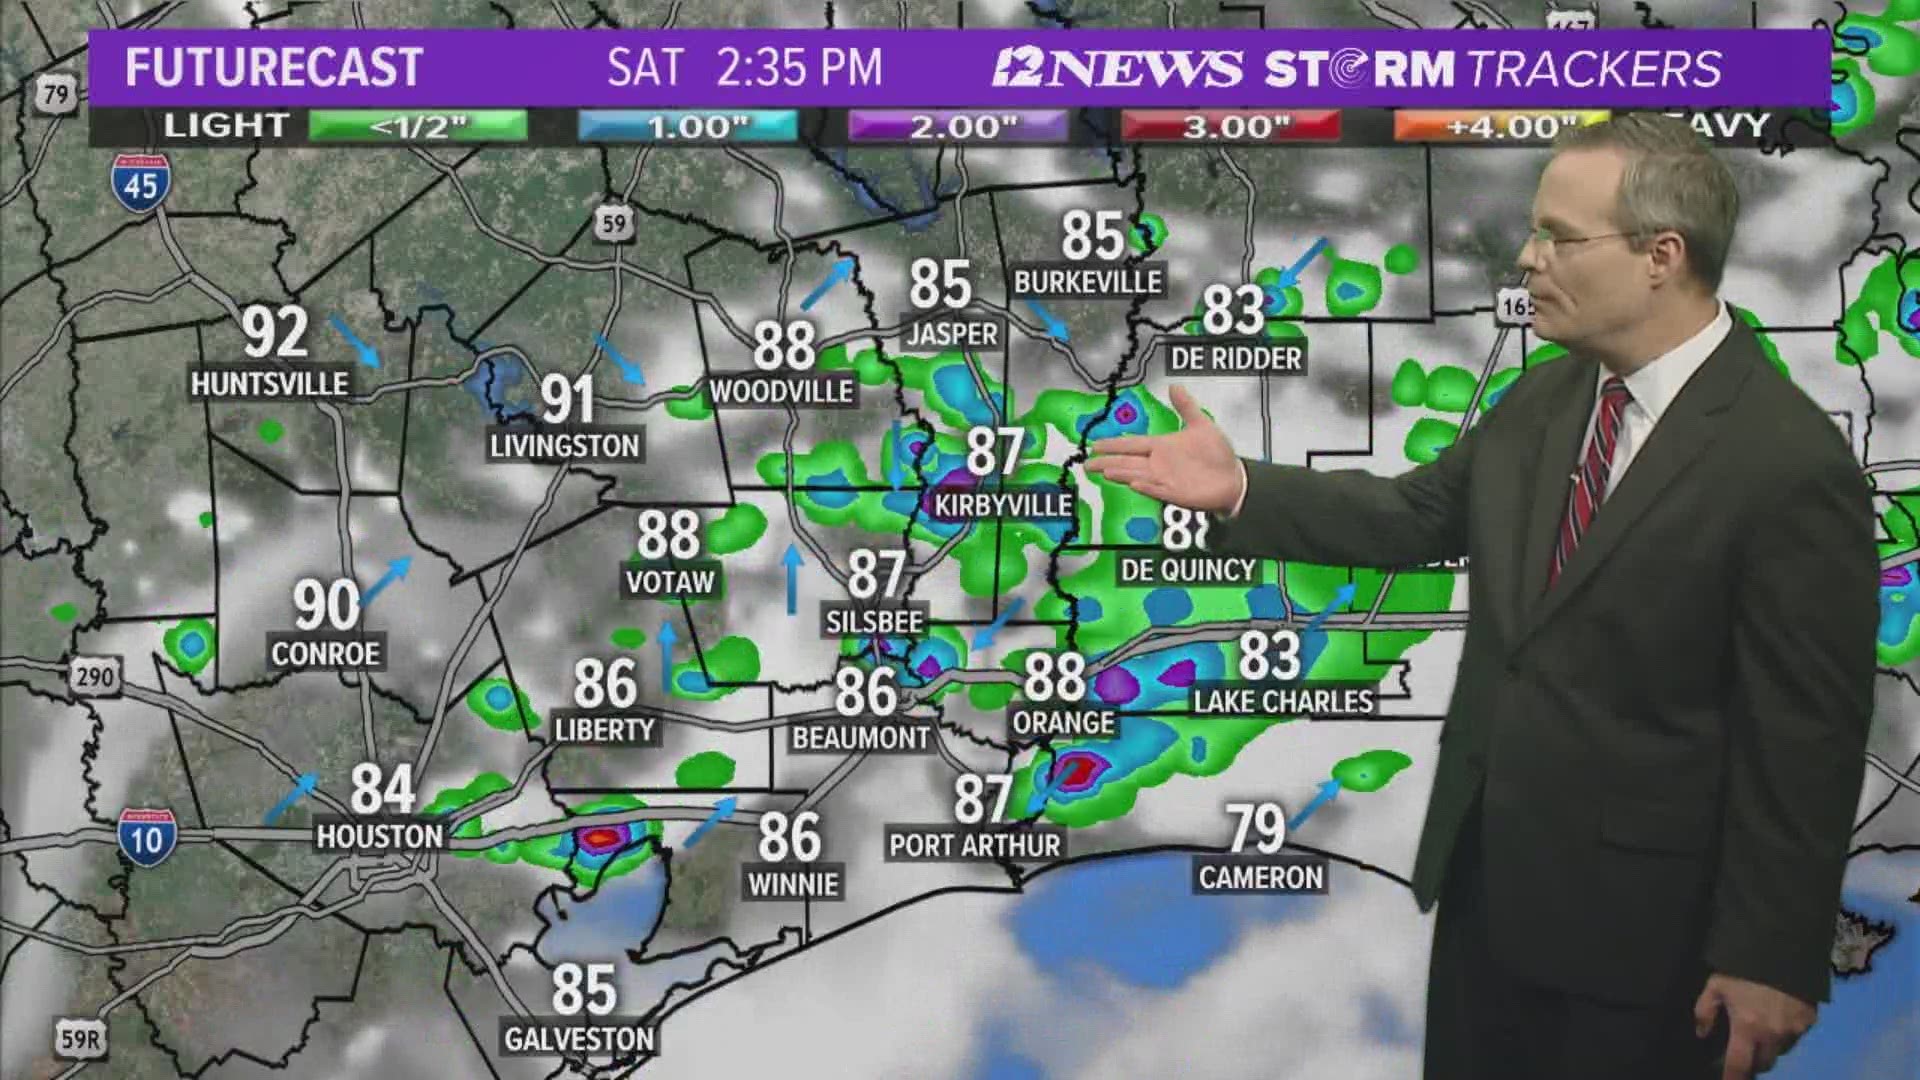 A stalling front, copious atmospheric moisture and instability will keep scattered showers and thunderstorms in the forecast this weekend in SE Texas.